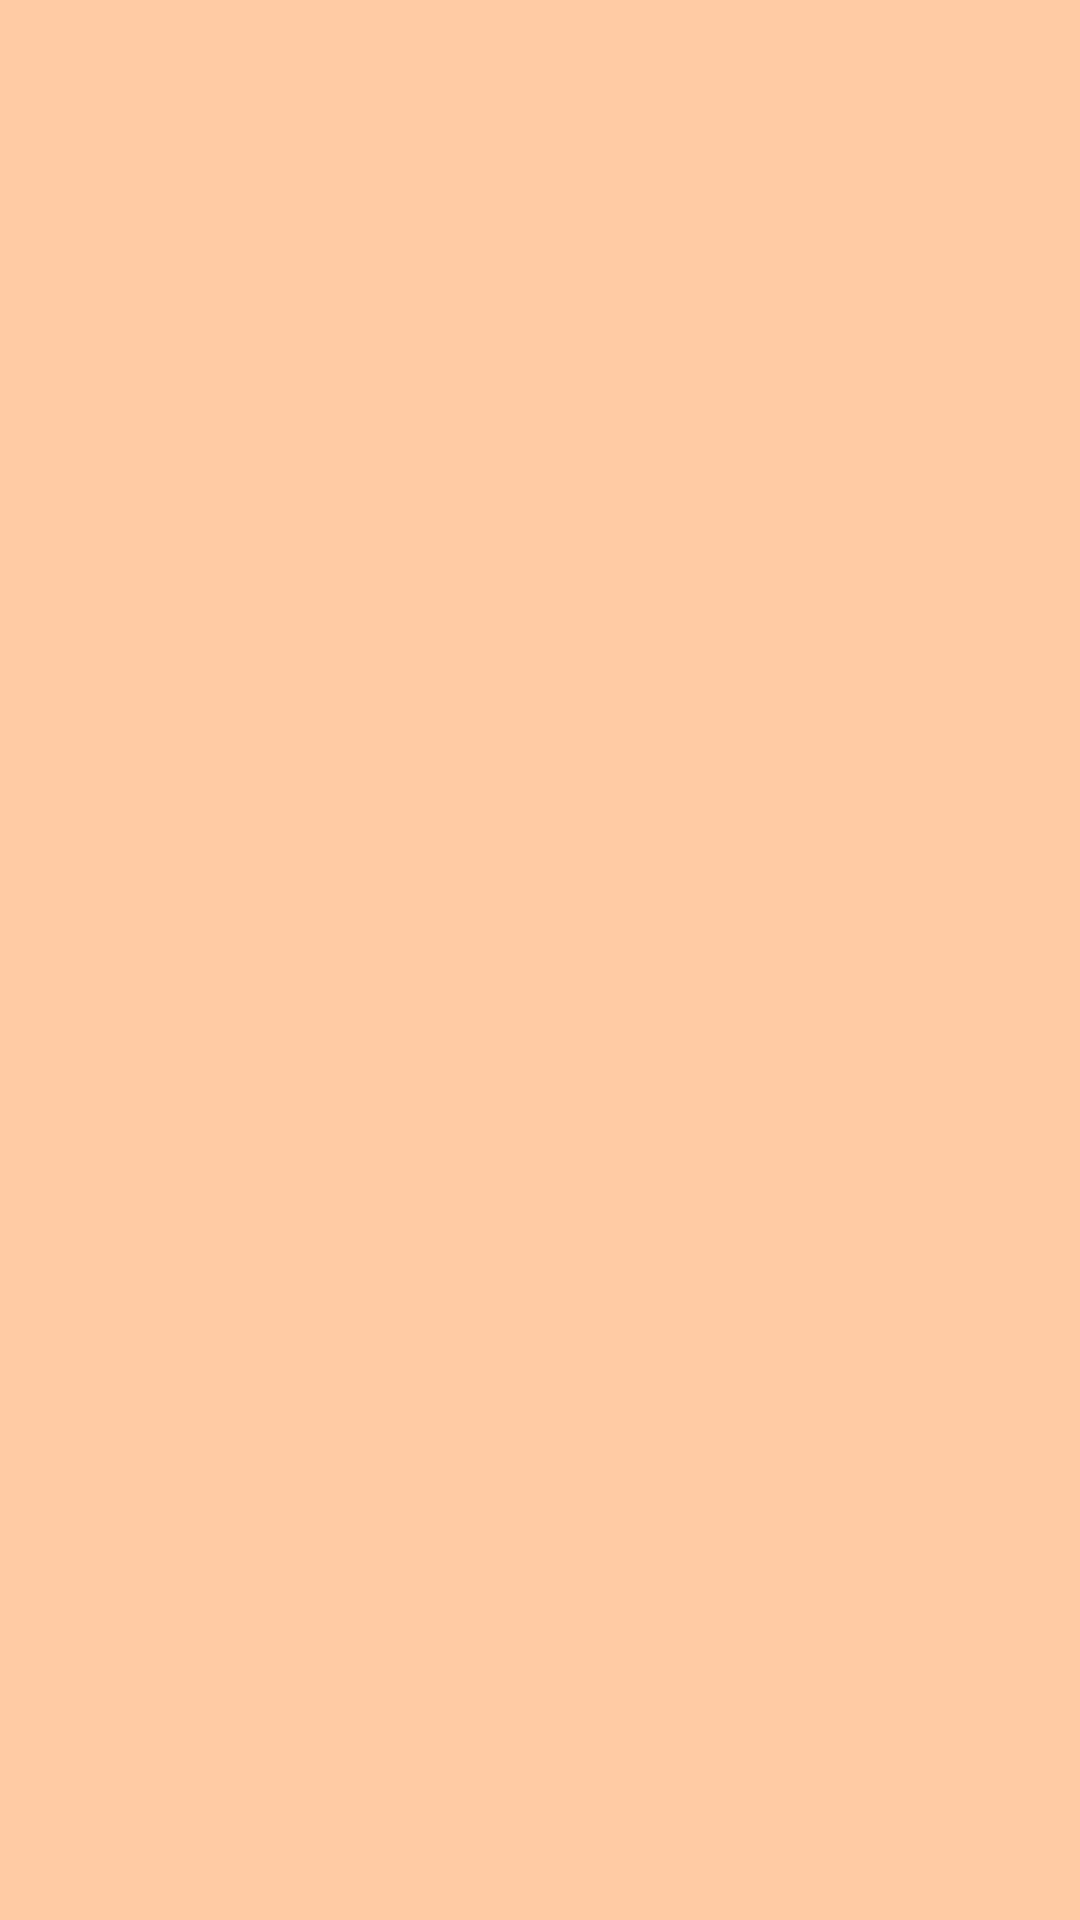 1080x1920 Deep Peach Solid Color Background